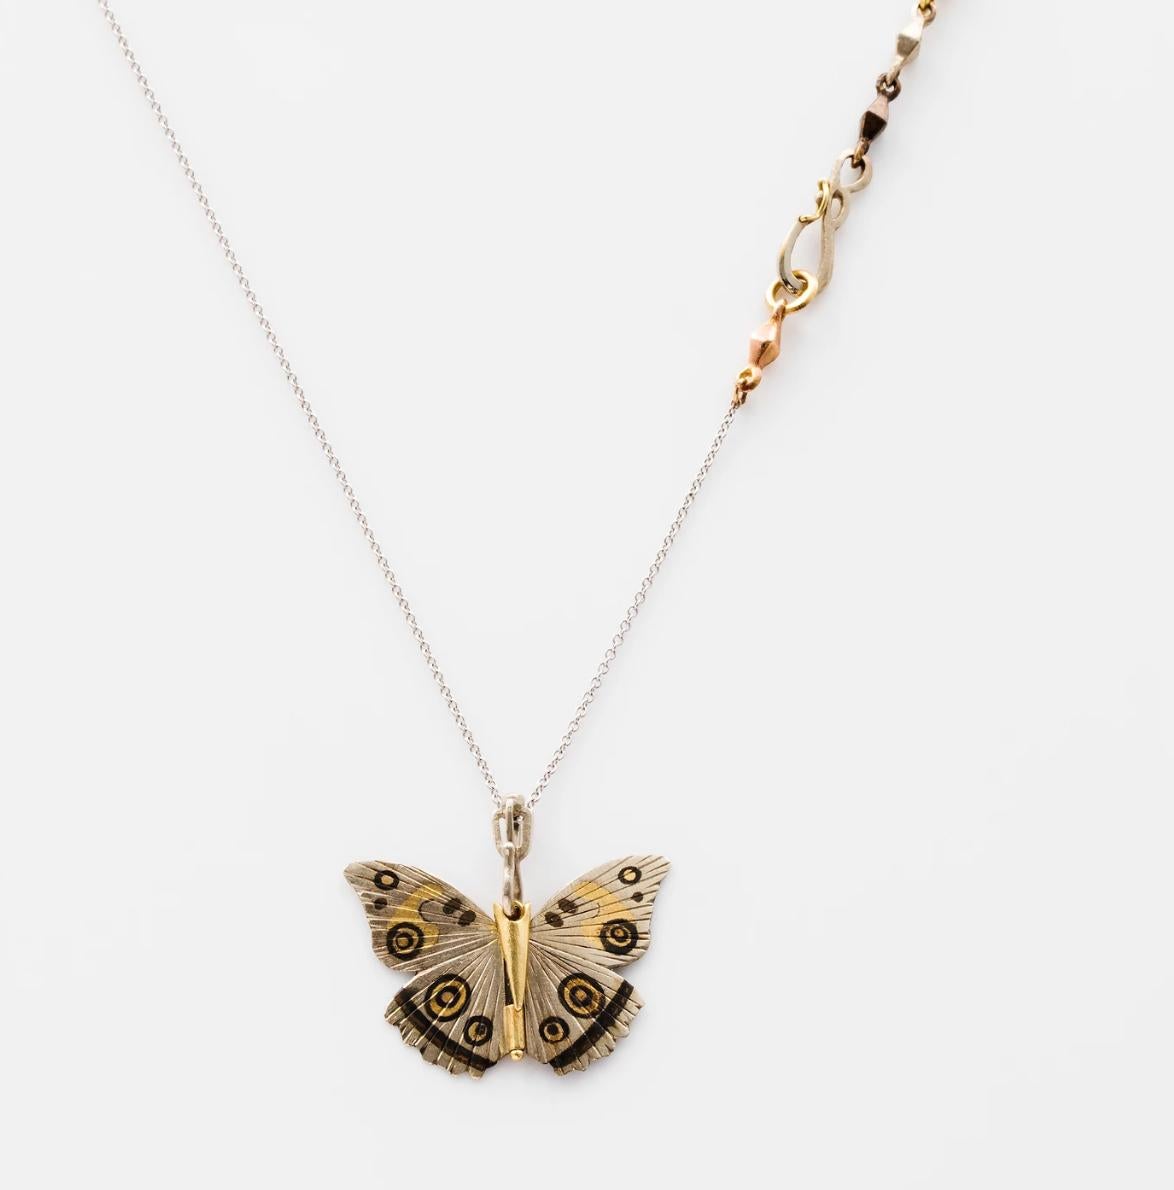 James Banks's signature butterfly necklace features a White Buckeye butterfly with a hinge at the center to allow movement of the wings, set in 18k White Gold with 18k Yellow Gold and Rose Bronze inlay hung on an 18k White Gold Chain and a single